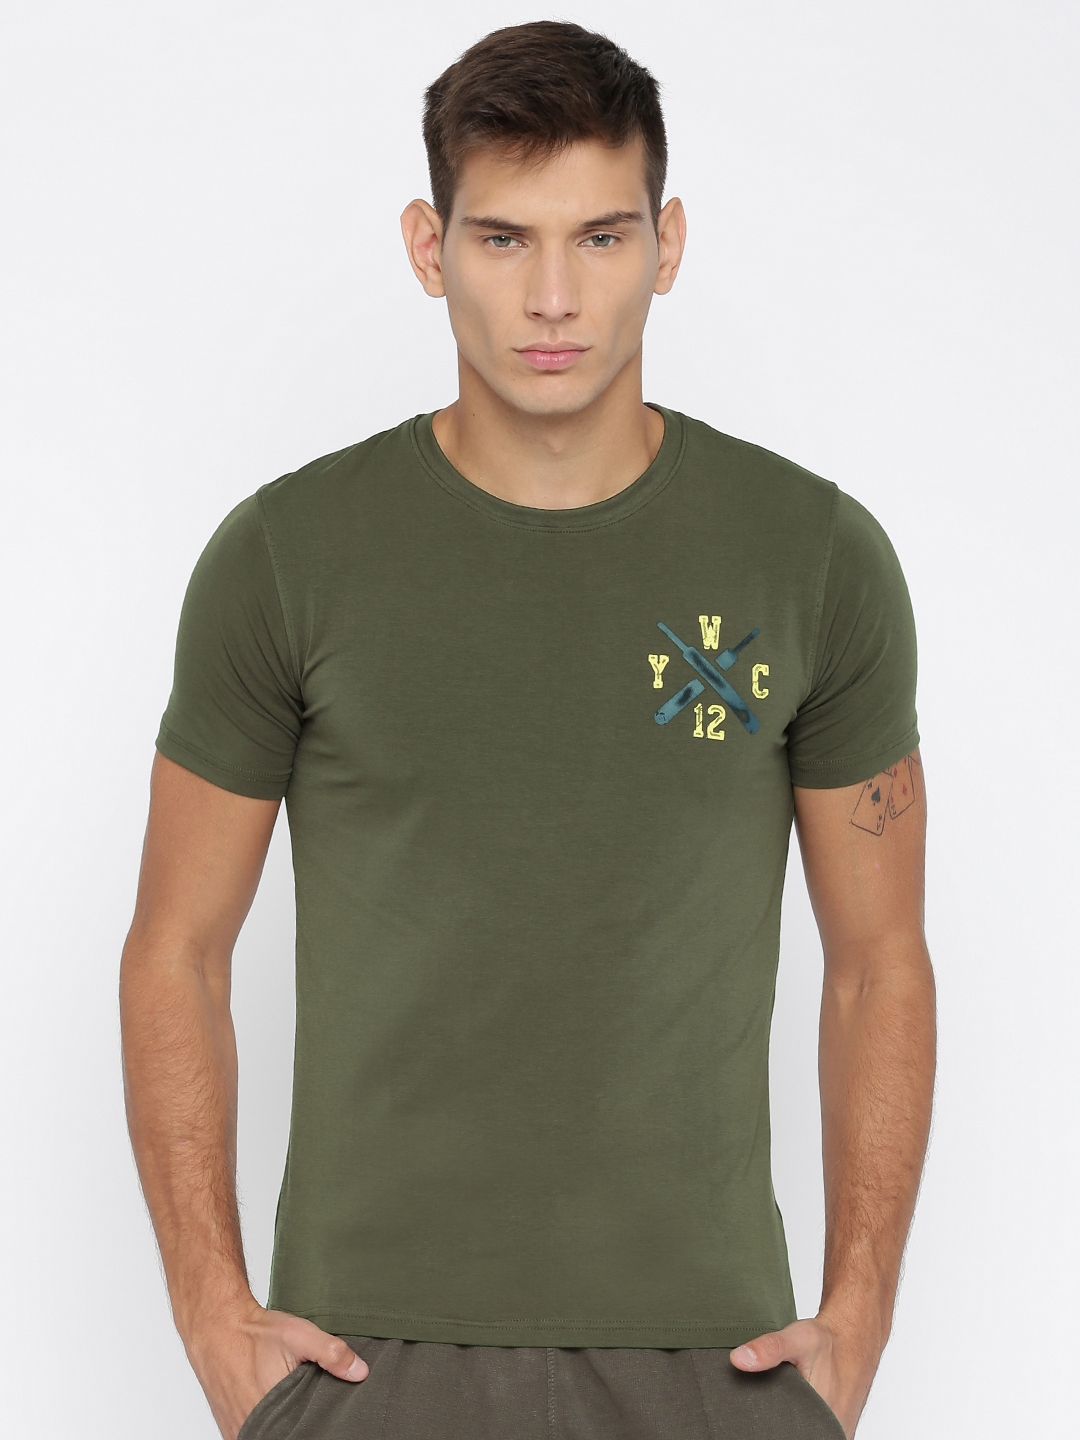 Download Buy YWC Men Olive Green Round Neck T Shirt With Printed ...